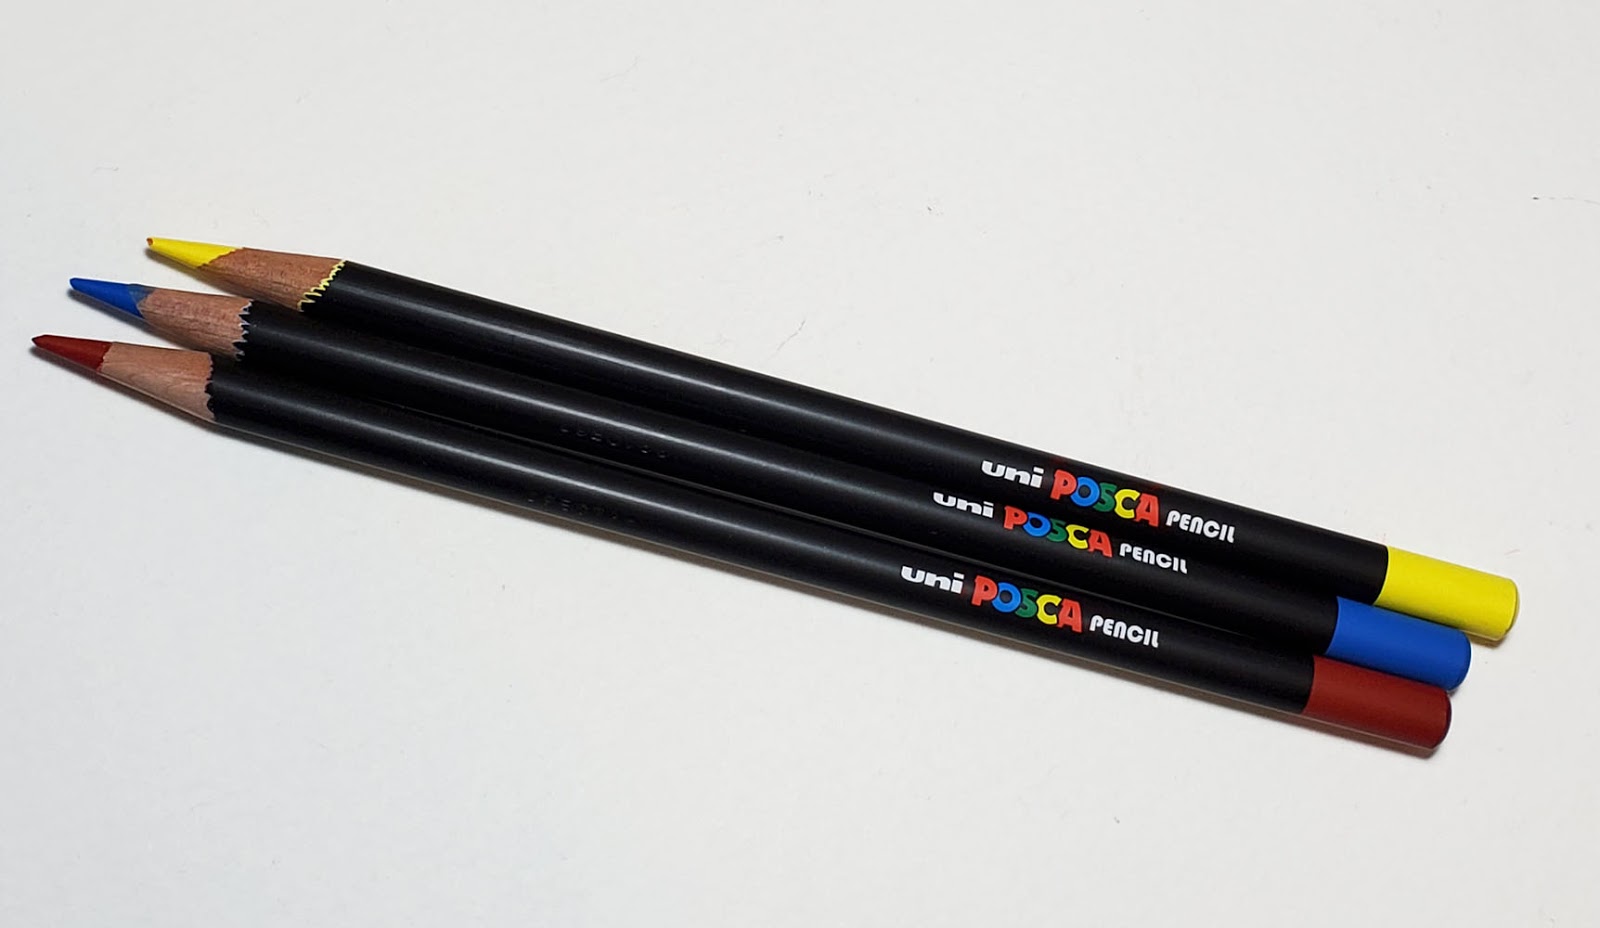 Posca colored pencils- test and comparison to the Holbein colored